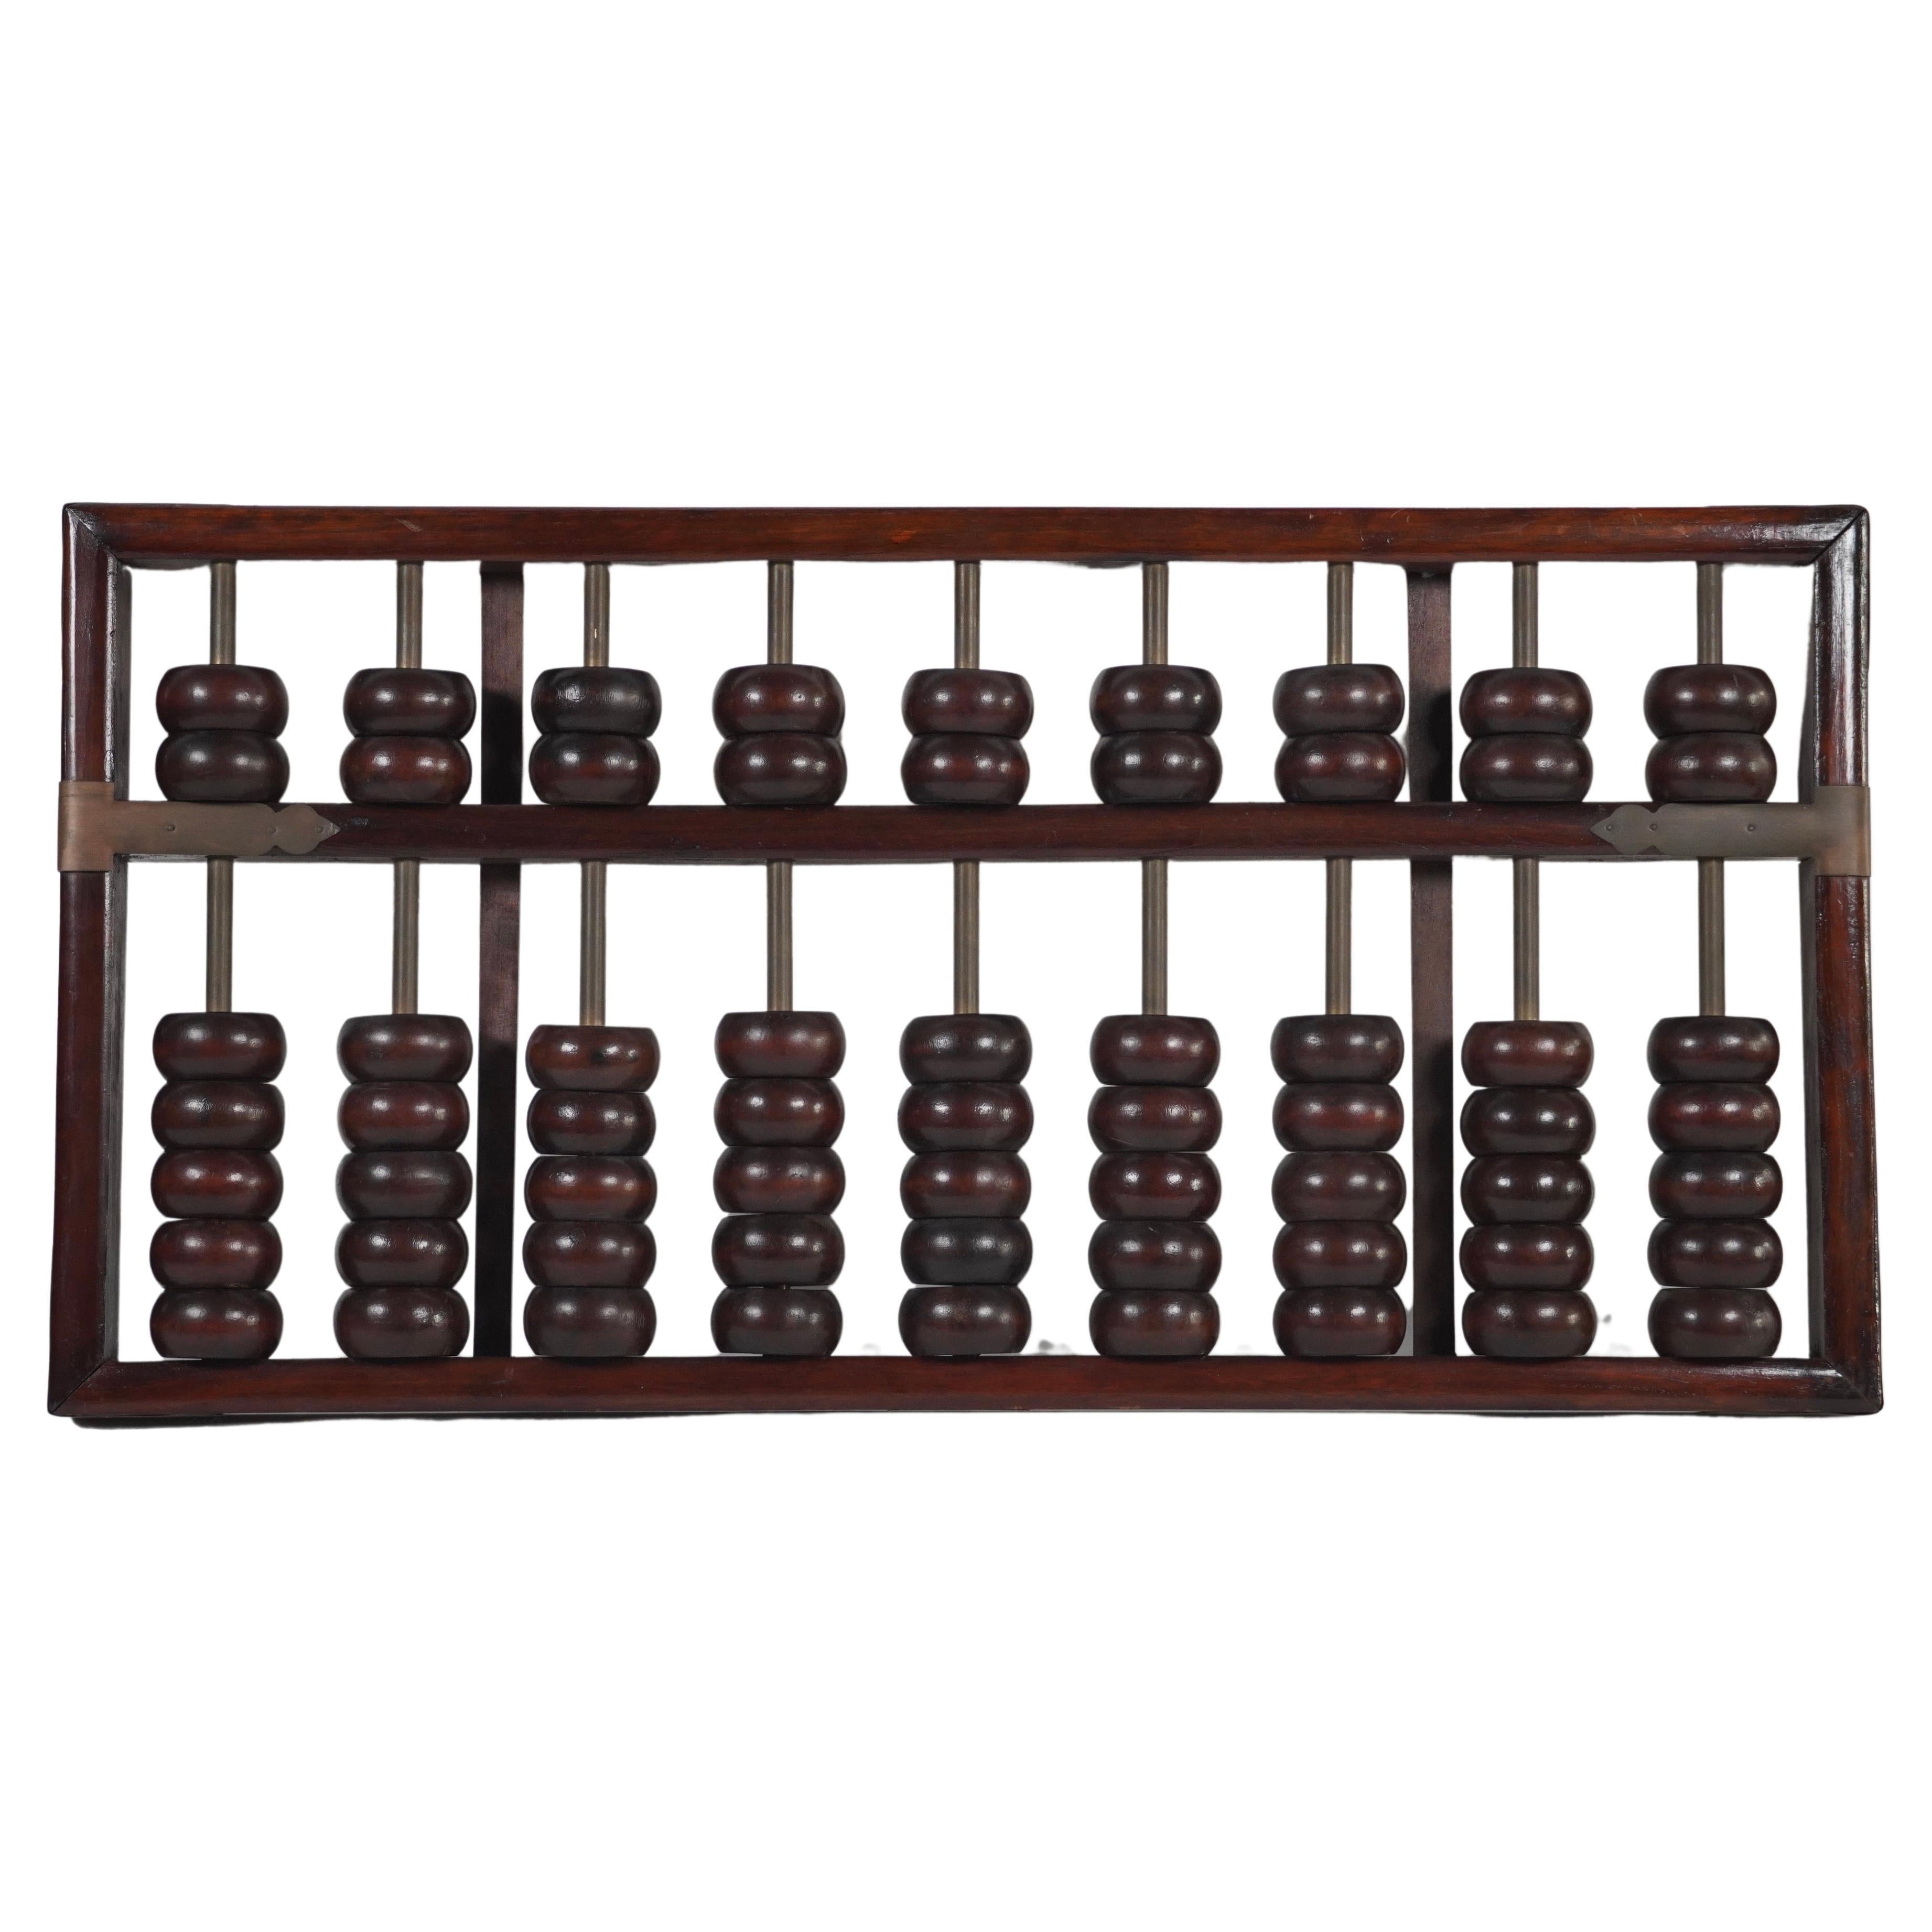 Vintage Large Oversized Class Room Teaching Aid Abacus